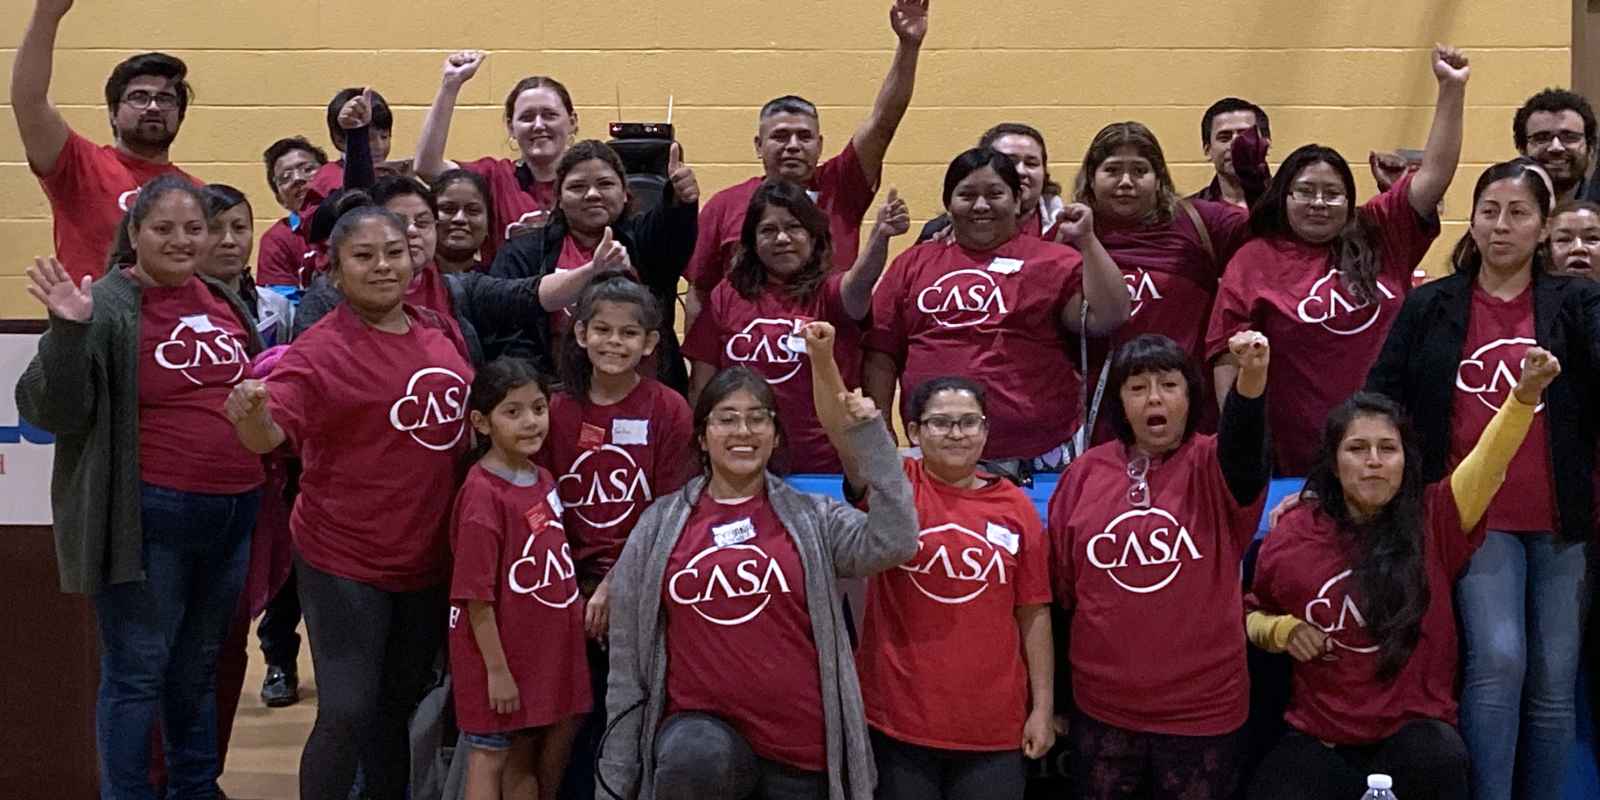 A group photo of CASA members wearing red CASA t-shirts. Several people have their first raised.